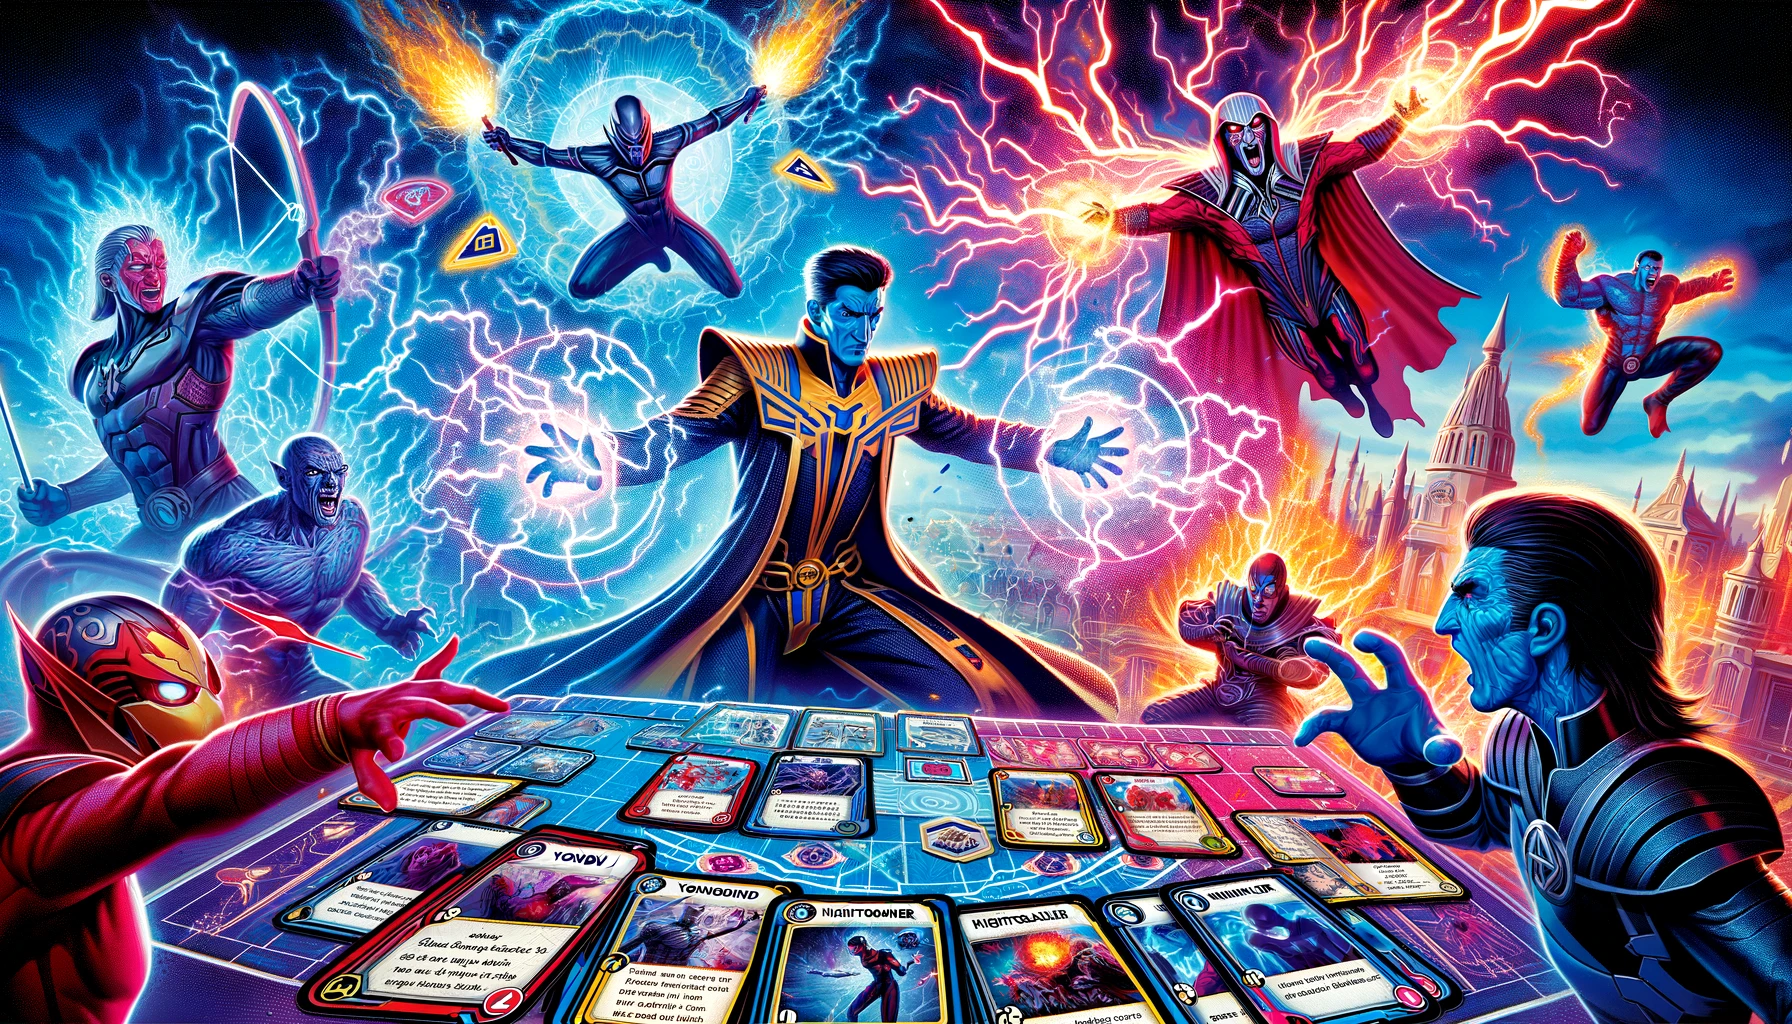 Illustration featuring Yondu destroying a card with his energy arrow, Nightcrawler teleporting between locations, and Mister Sinister duplicating himself on a Marvel Snap battlefield with three locations in a vibrant, fantastical atmosphere.